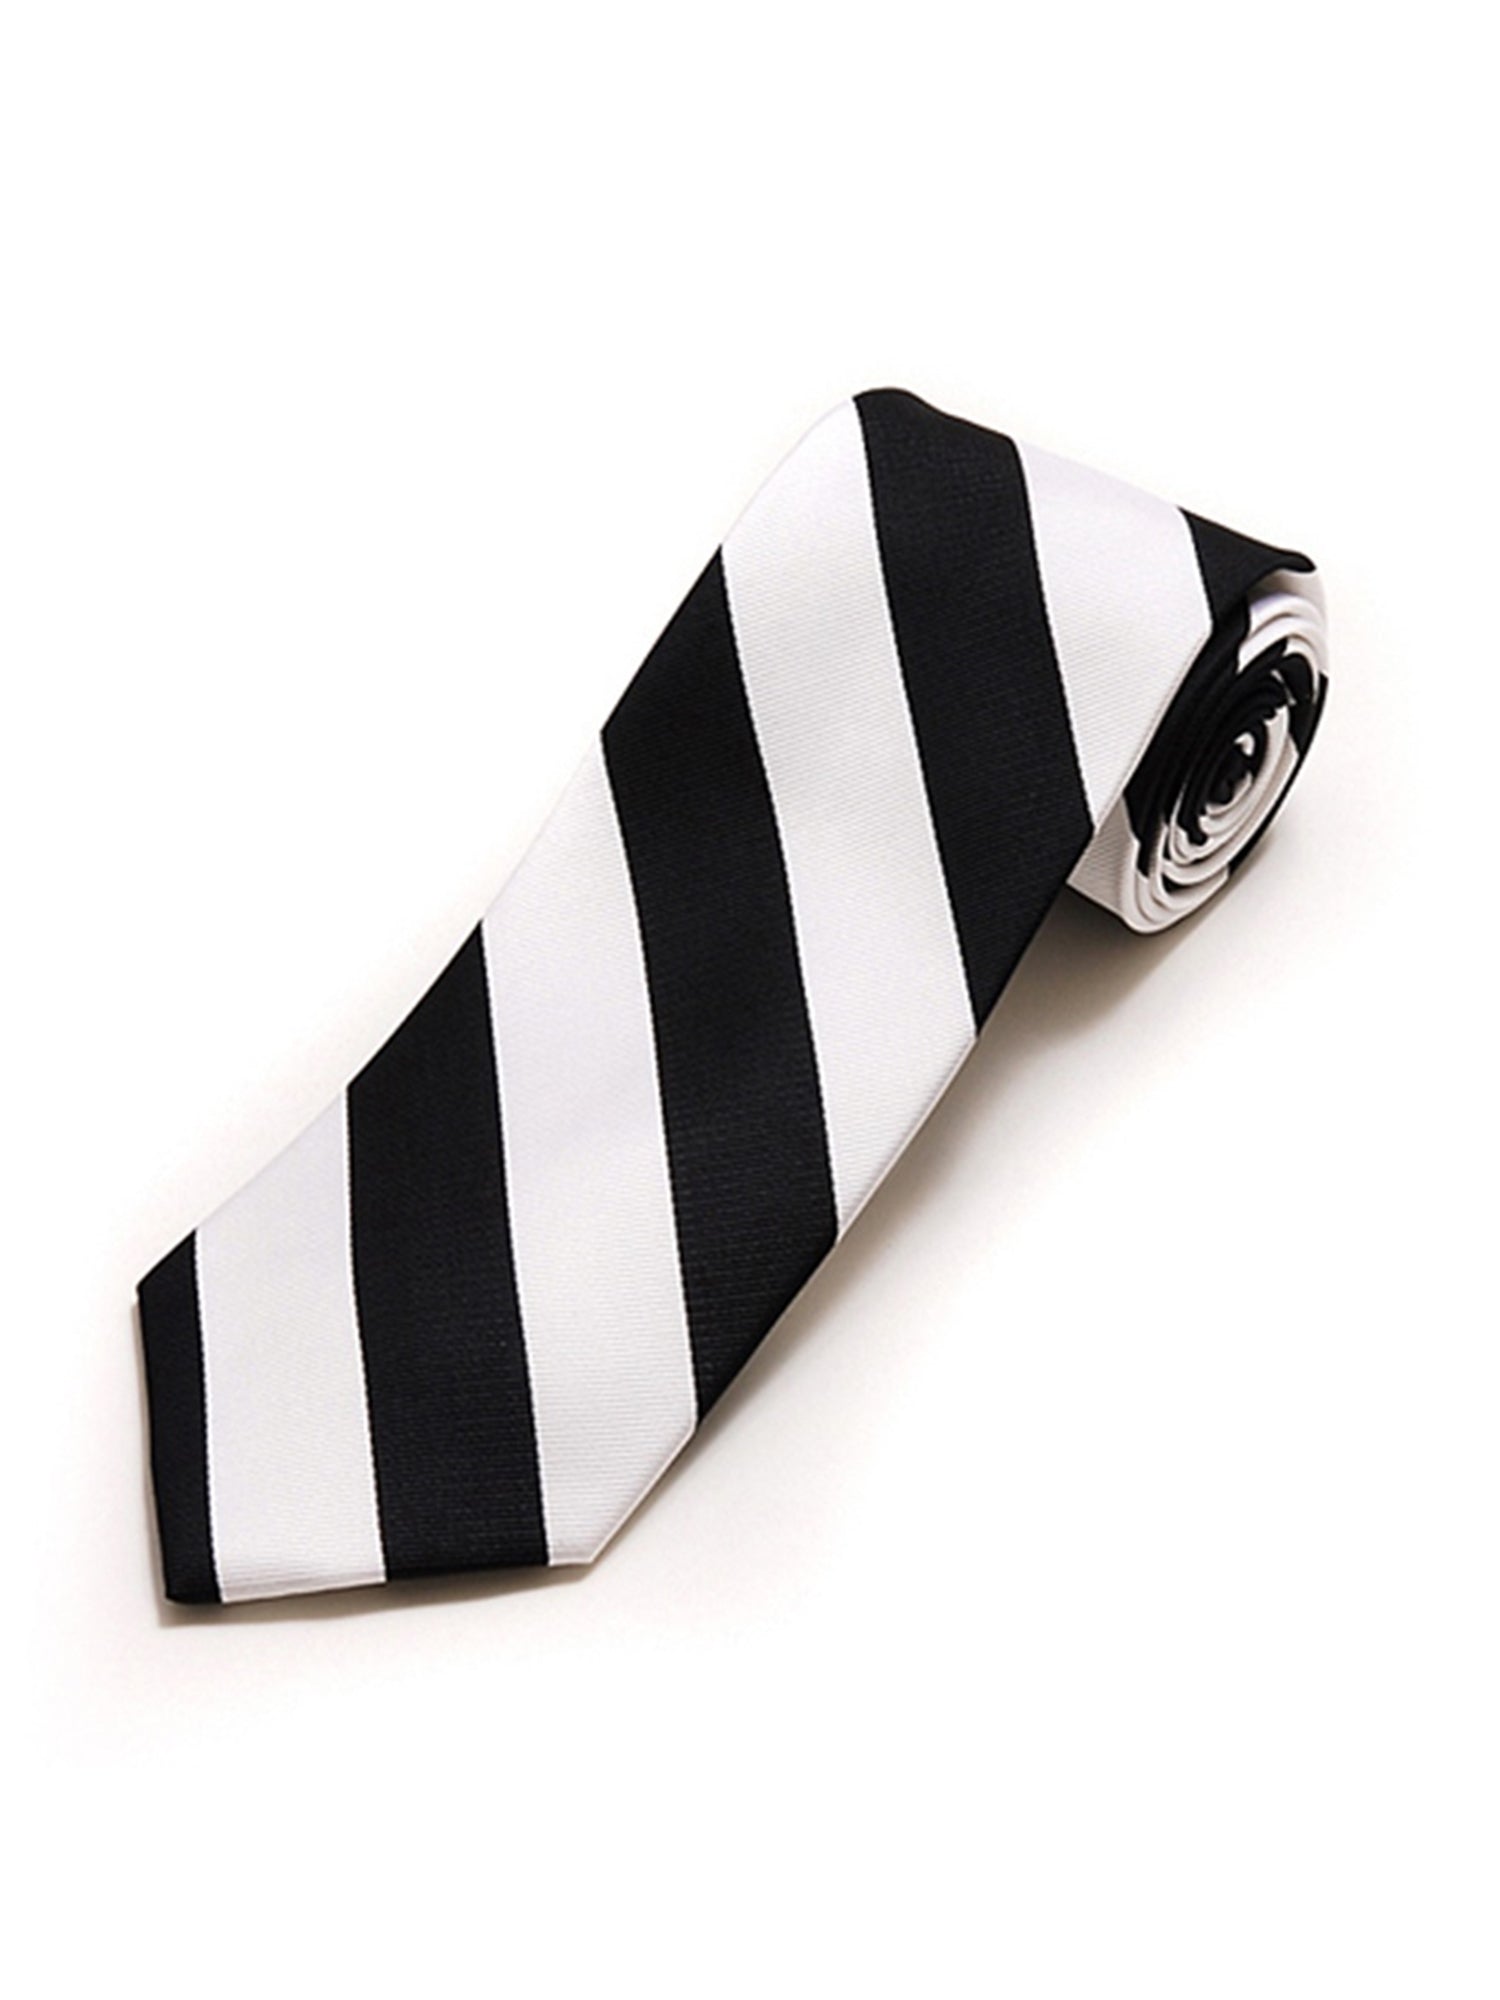 Men's College Striped Colored Silk Long Or X-Long Neck Tie Neck Tie TheDapperTie White & Black 57" long & 3.25" wide 